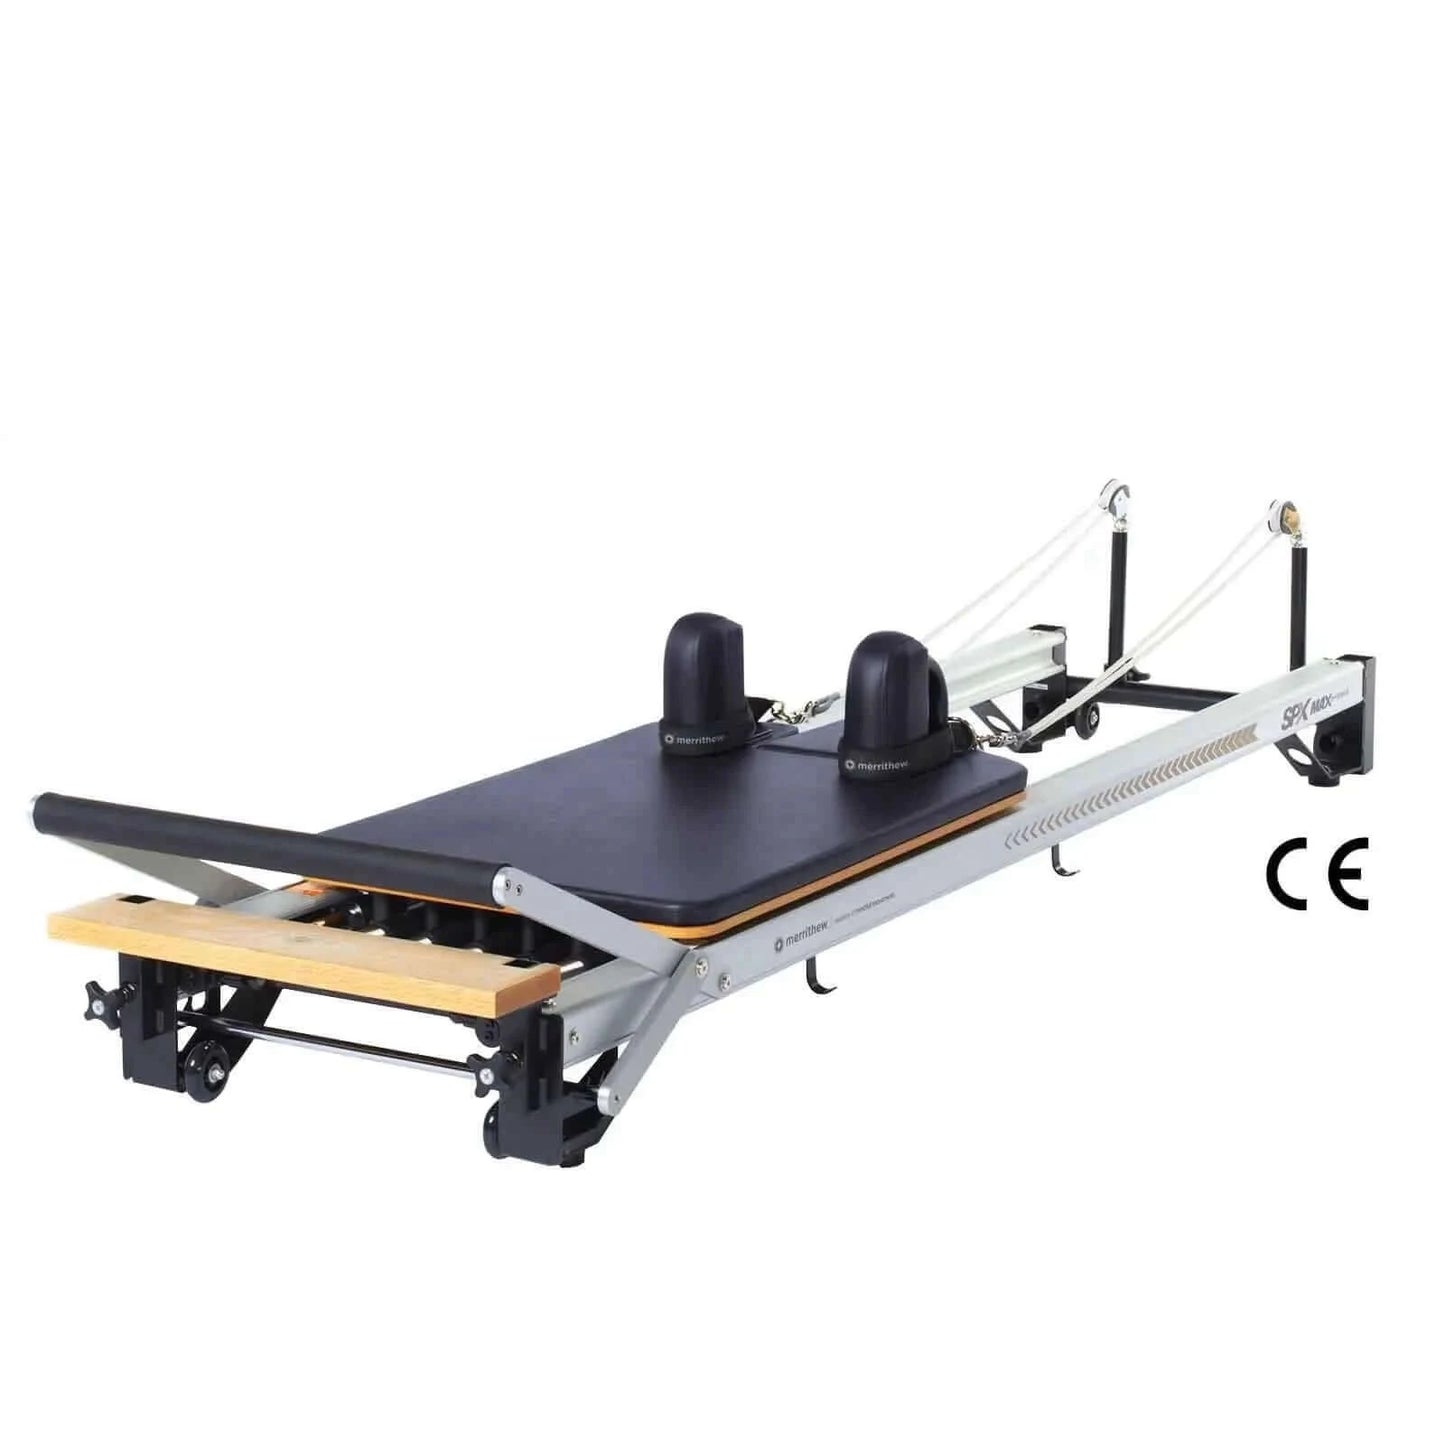 Eclipse Merrithew™ Pilates SPX® Max Reformer by Merrithew™ sold by Pilates Matters® by BSP LLC